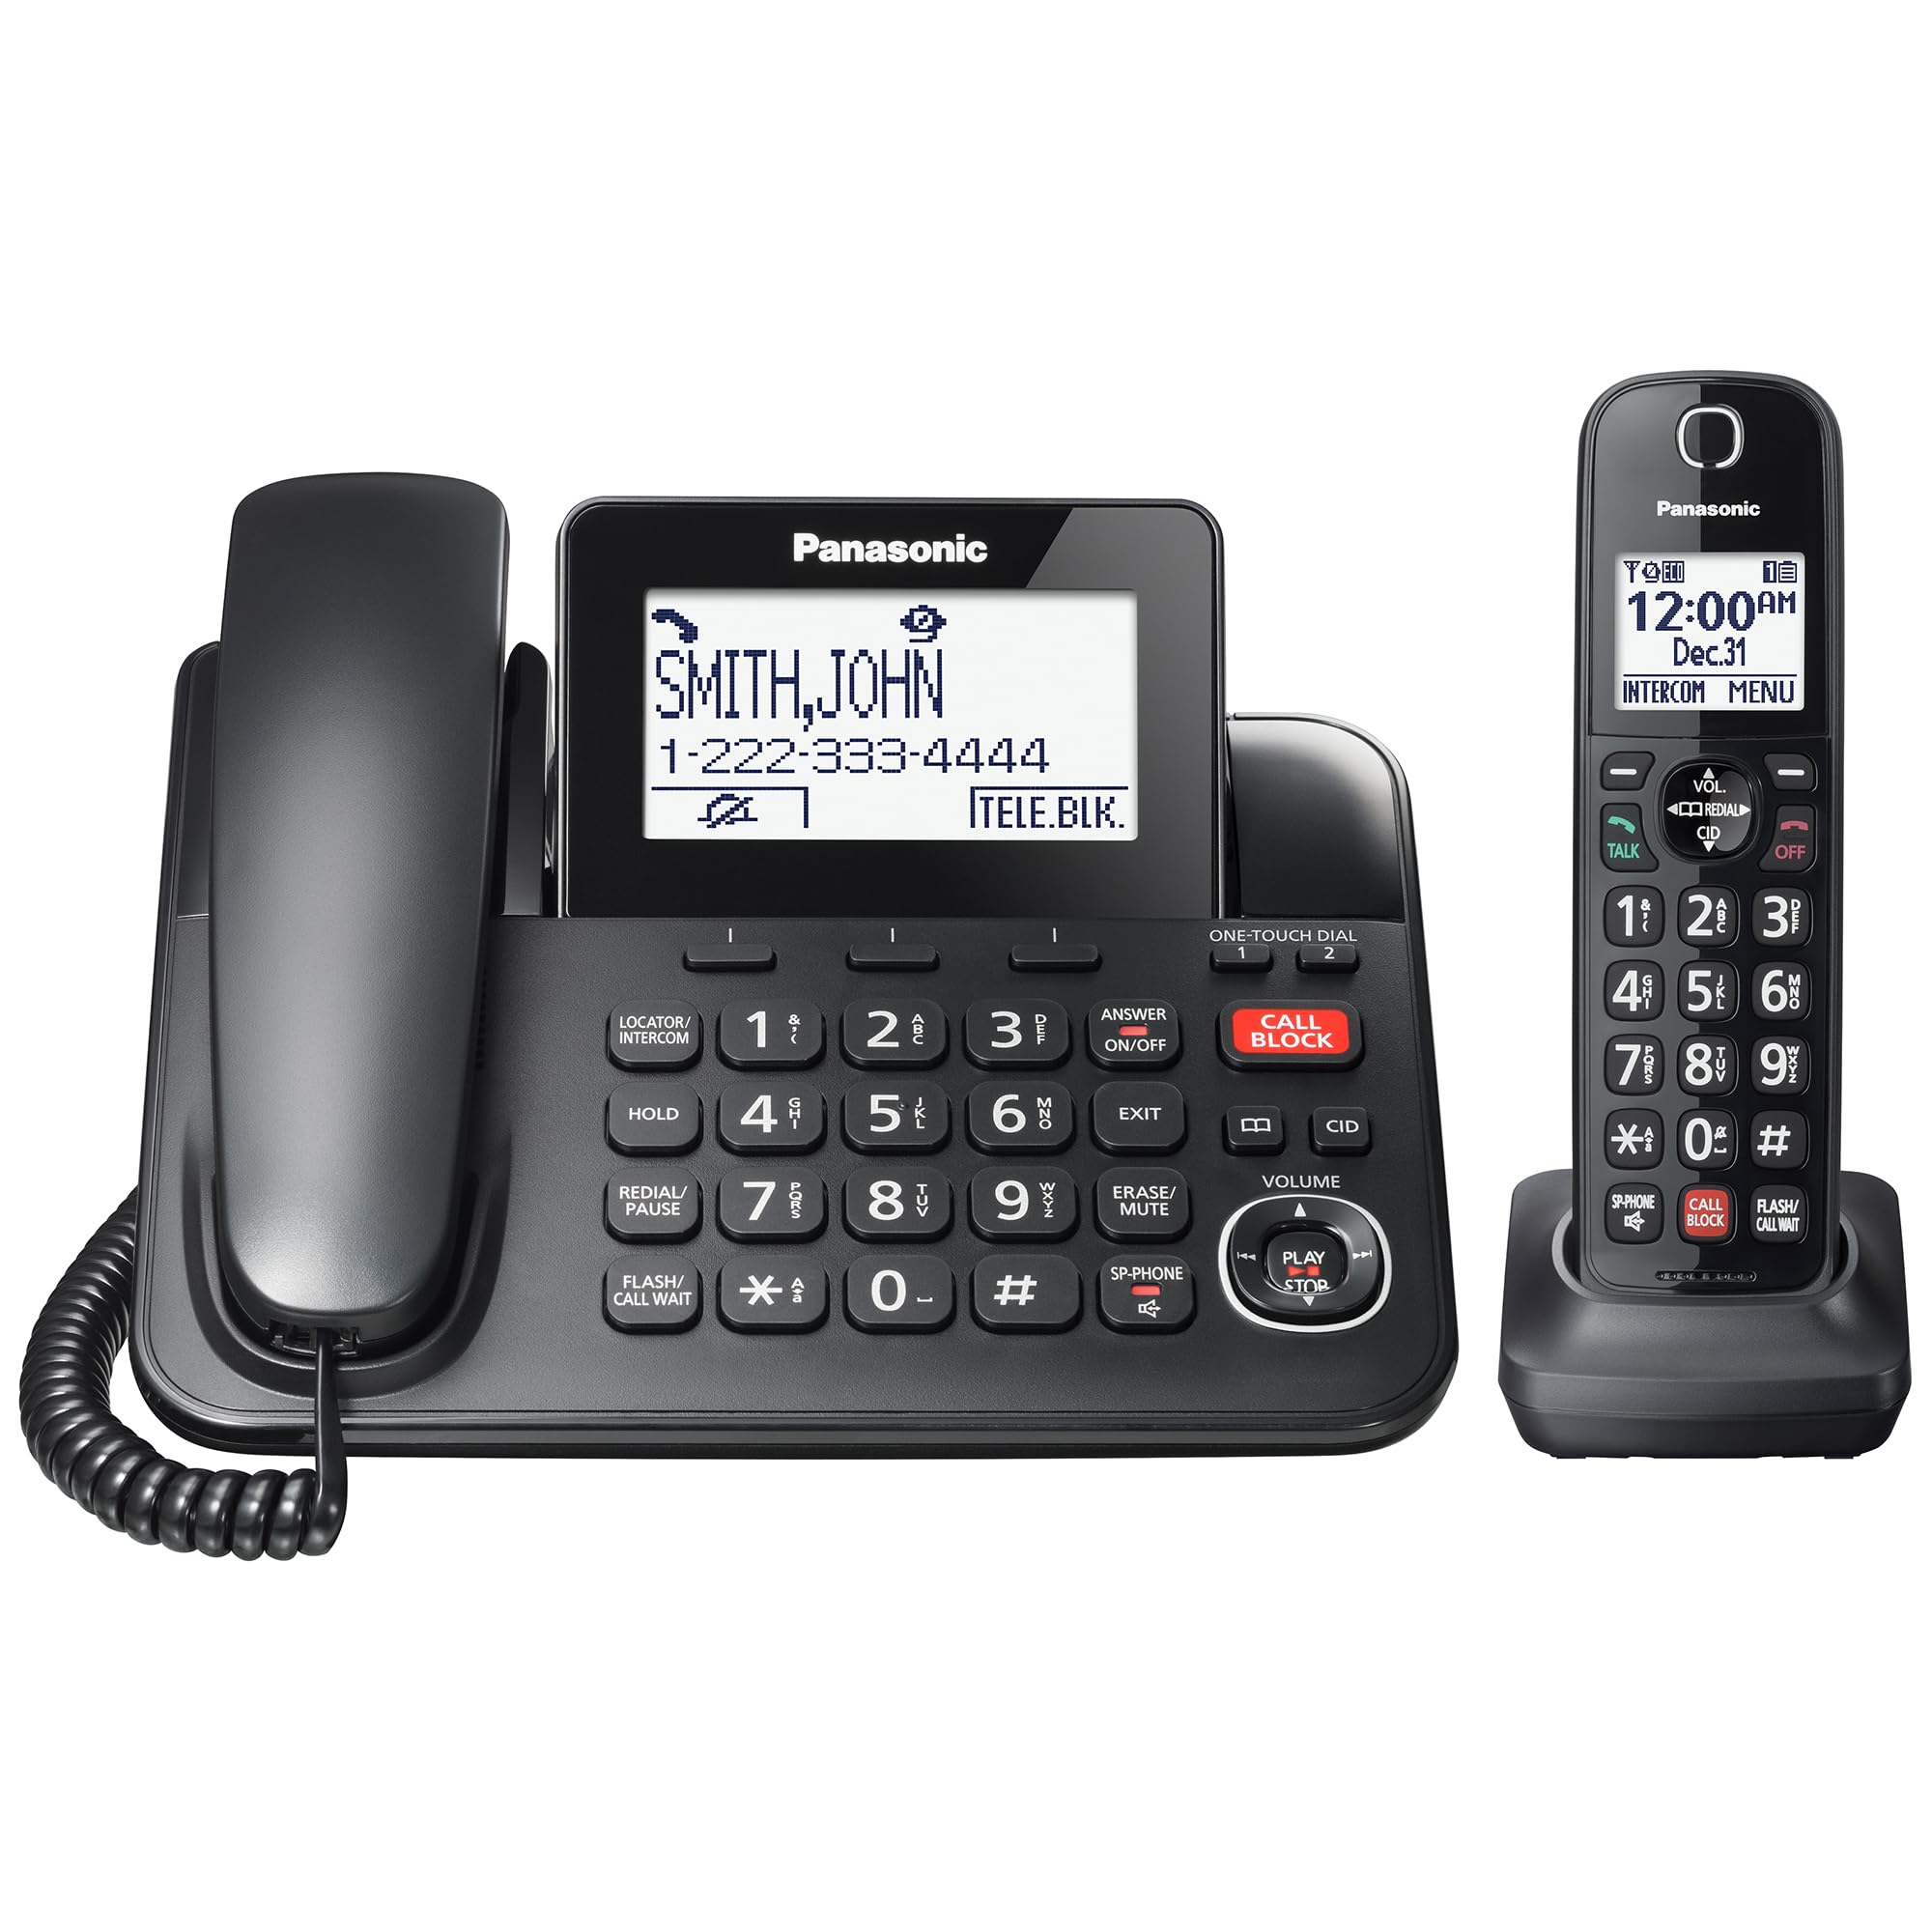 Panasonic Corded/Cordless Phone with Advanced Call Block, 2-Way Recording and Digital Answering Machine, 1 Handset Expandable up to 6 Cordless Handsets - KX-TGF850B (Black)